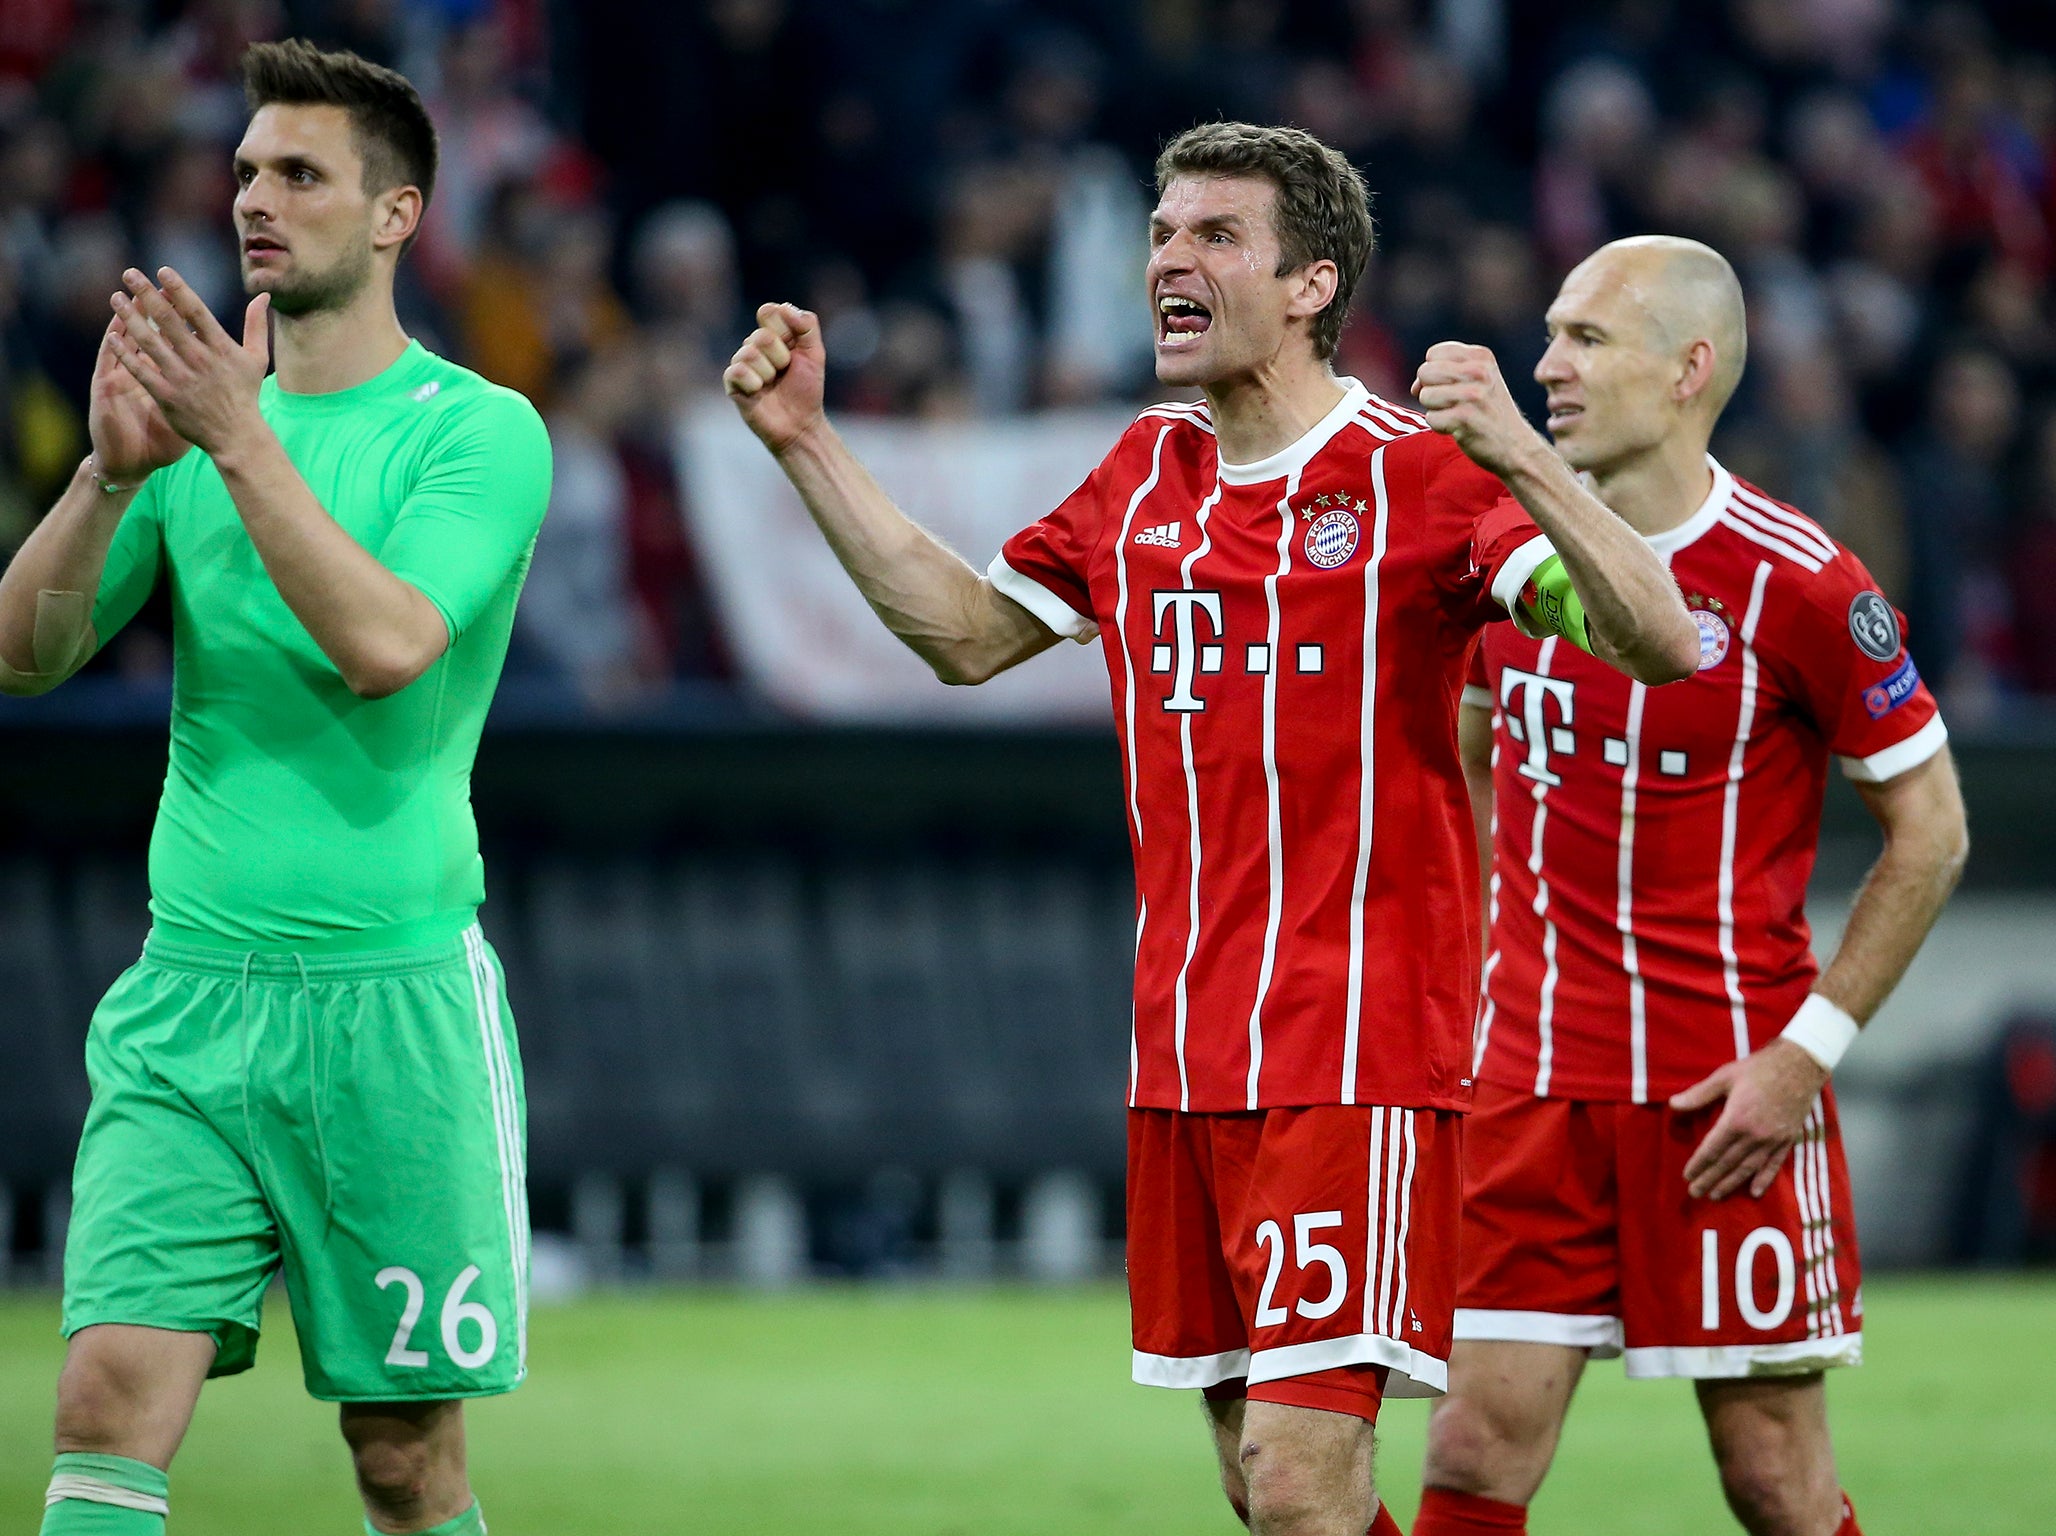 Quiet, efficient and under the radar: Bayern Munich could yet make the most noise in the Champions League